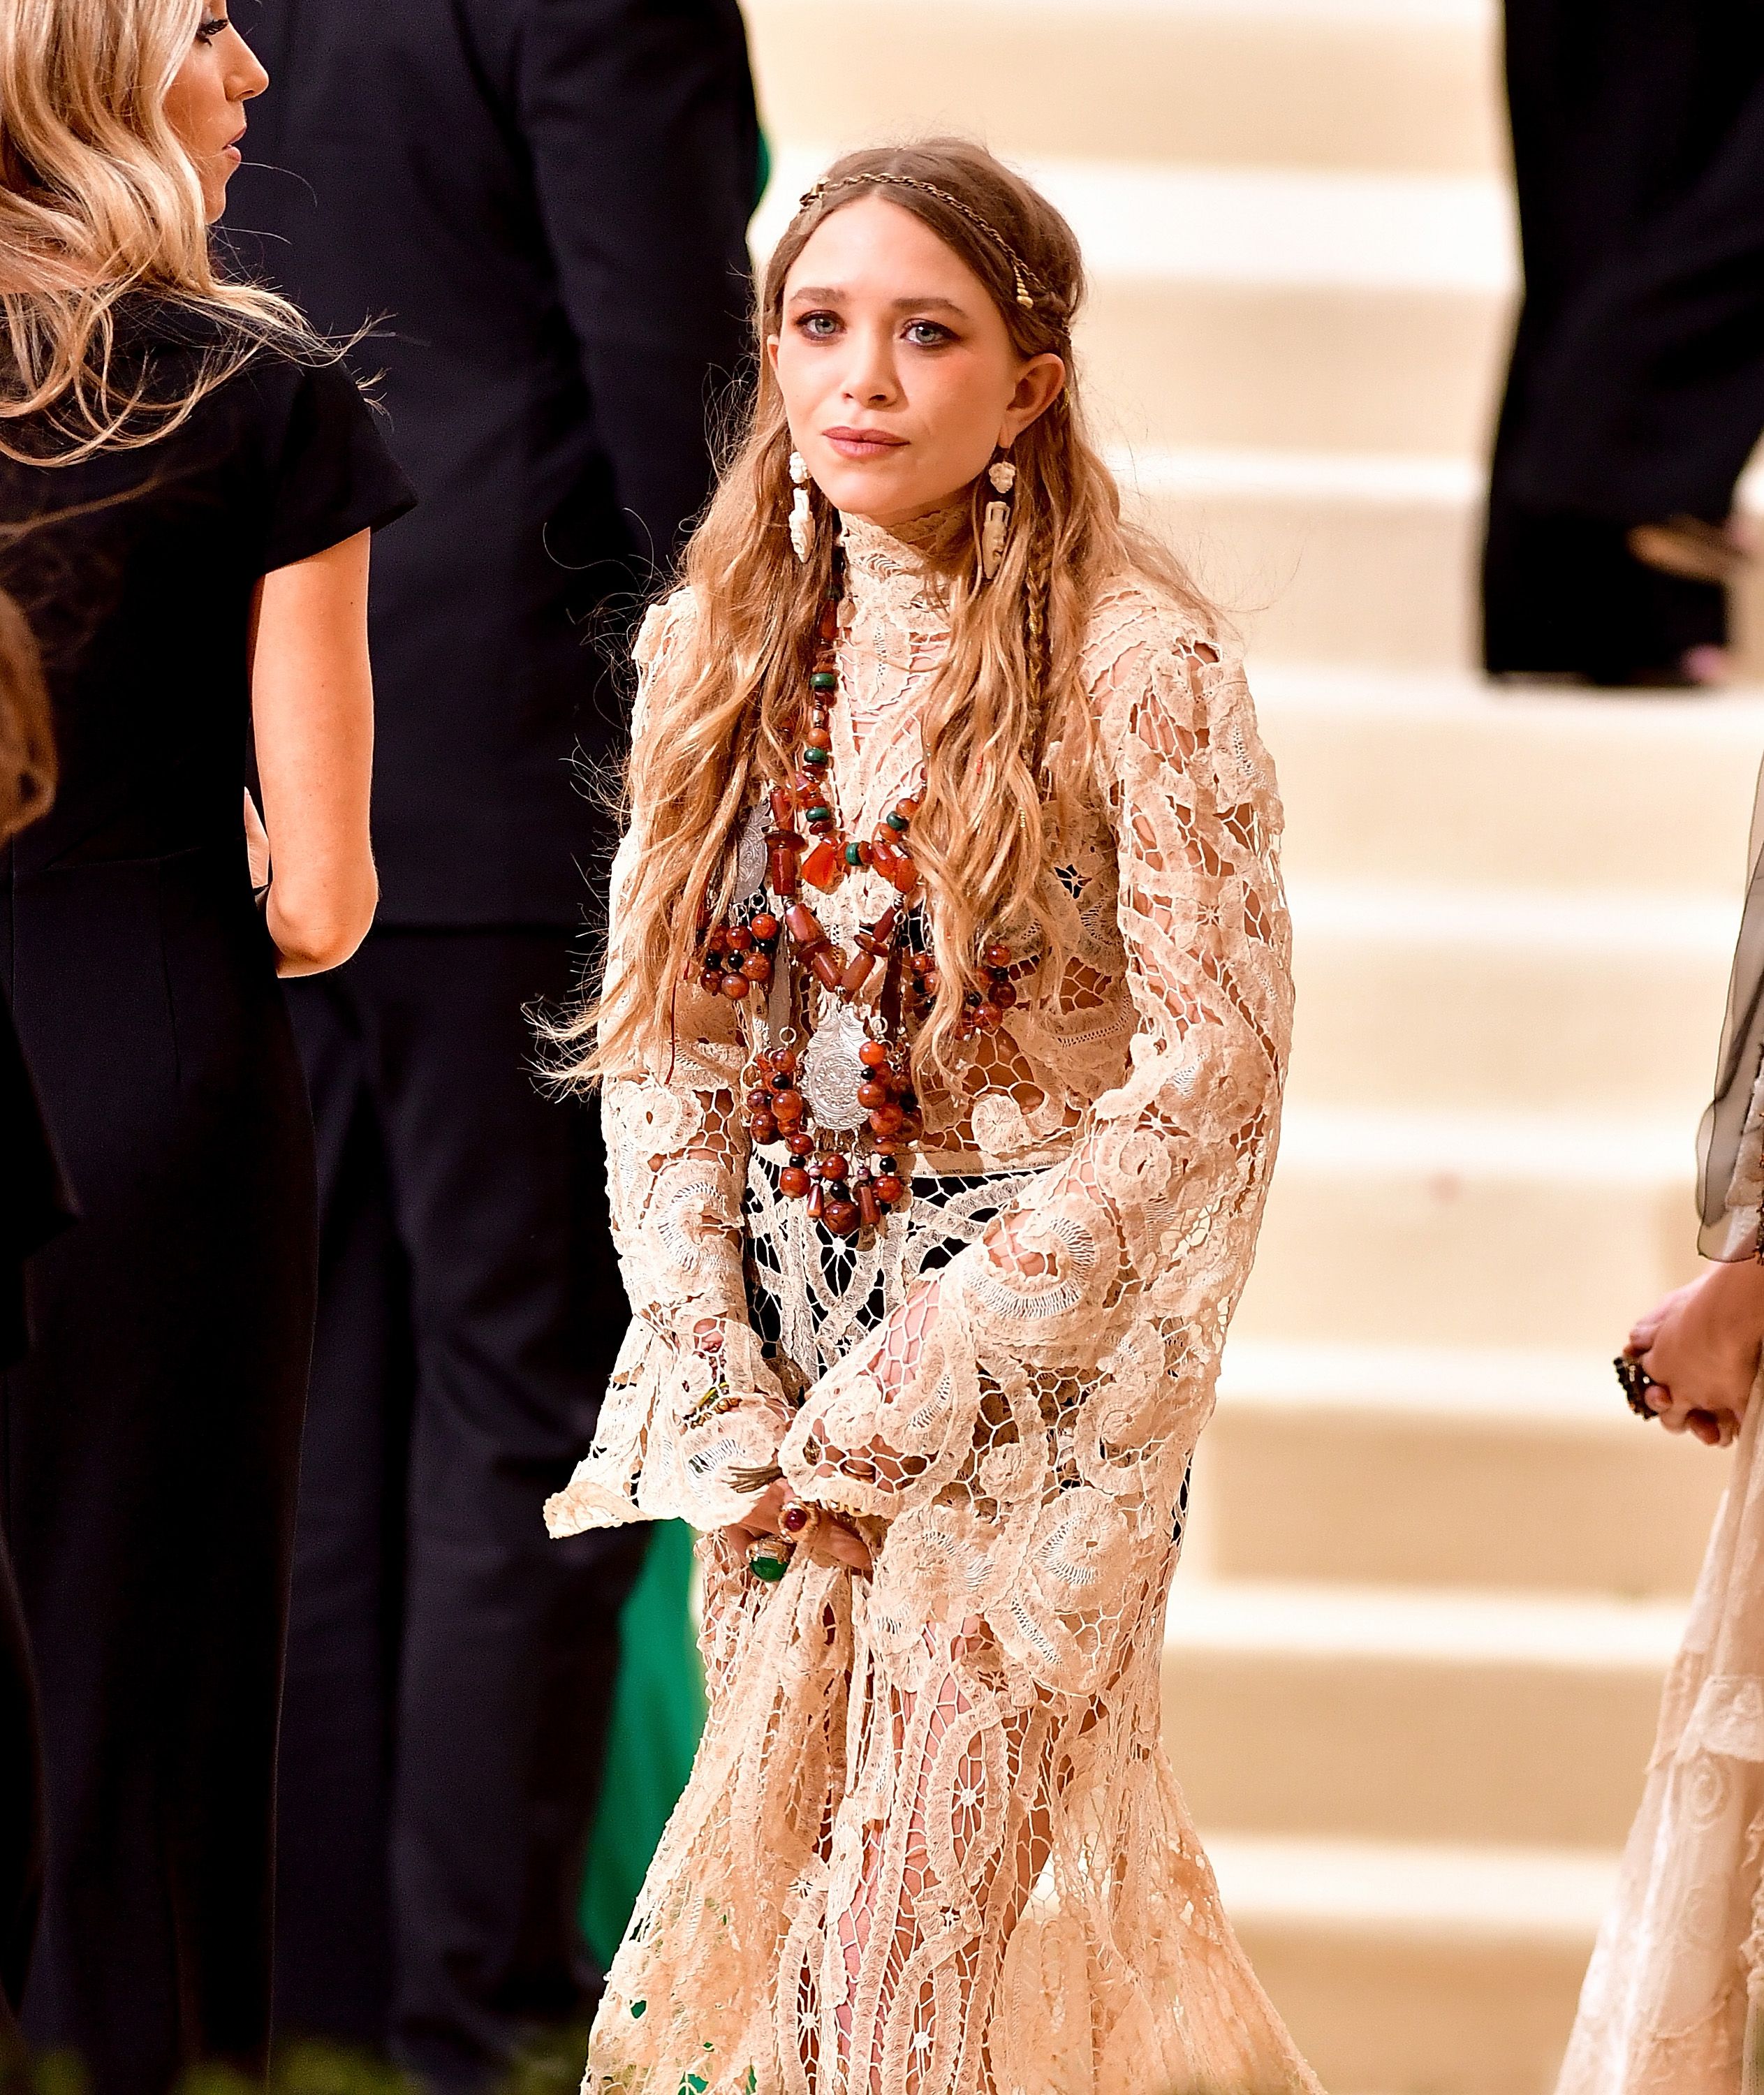 NEW YORK, NY - MAY 01: Mary-Kate Olsen attends the 'Rei Kawakubo/Comme des Garcons: Art Of The In-Between' Costume Institute Gala at Metropolitan Museum of Art on May 1, 2017 in New York City. (Photo by James Devaney/GC Images,